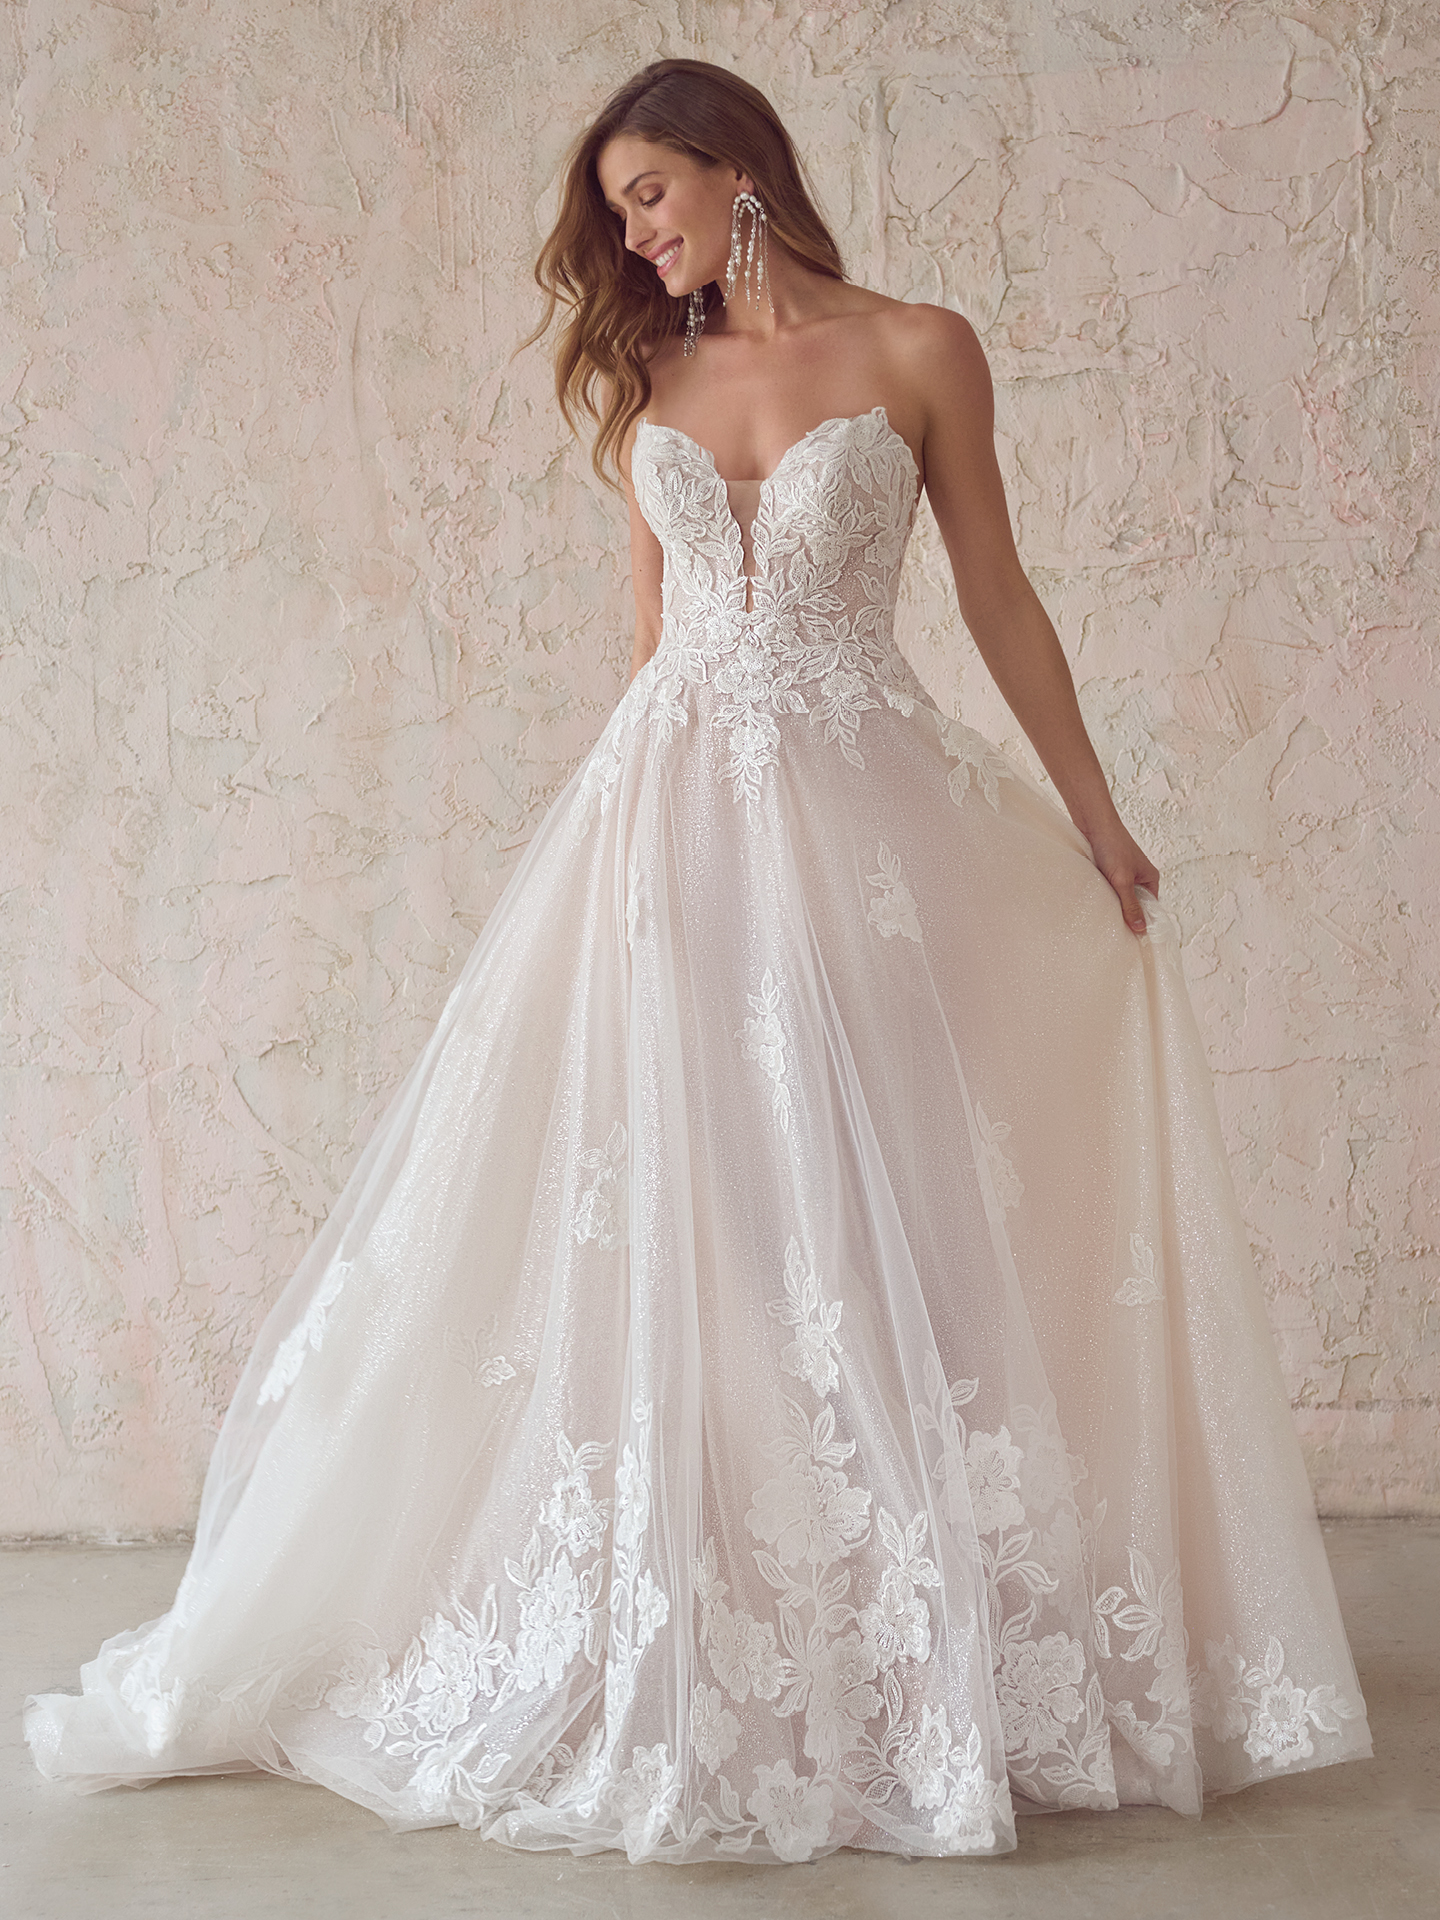 Bride In Lace A Line Wedding Dress Called Britney By Maggie Sottero